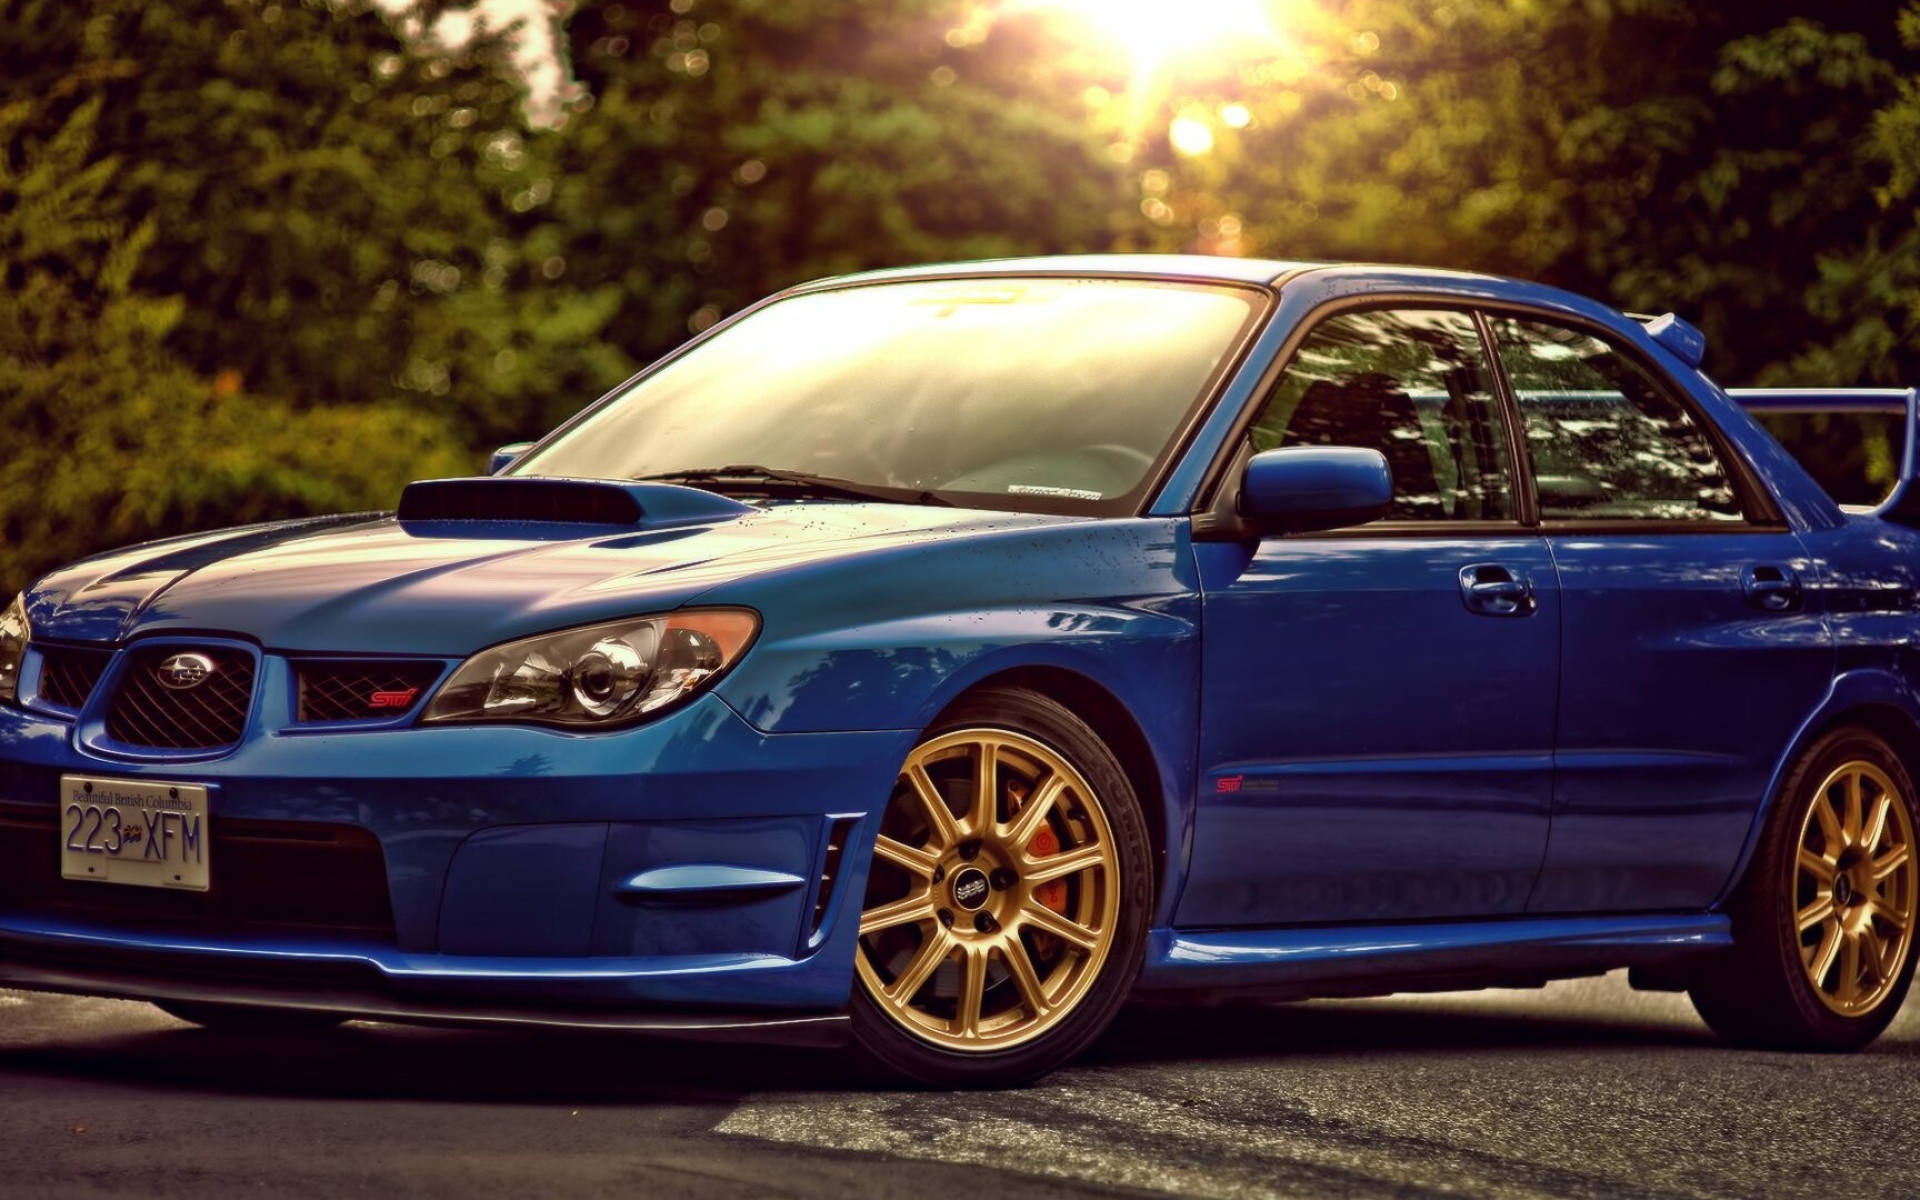 Subaru: Because of their unique box engine and all-wheel-drive system, company cars are known for their fuel efficiency,  Impreza WRX Sti. 1920x1200 HD Wallpaper.